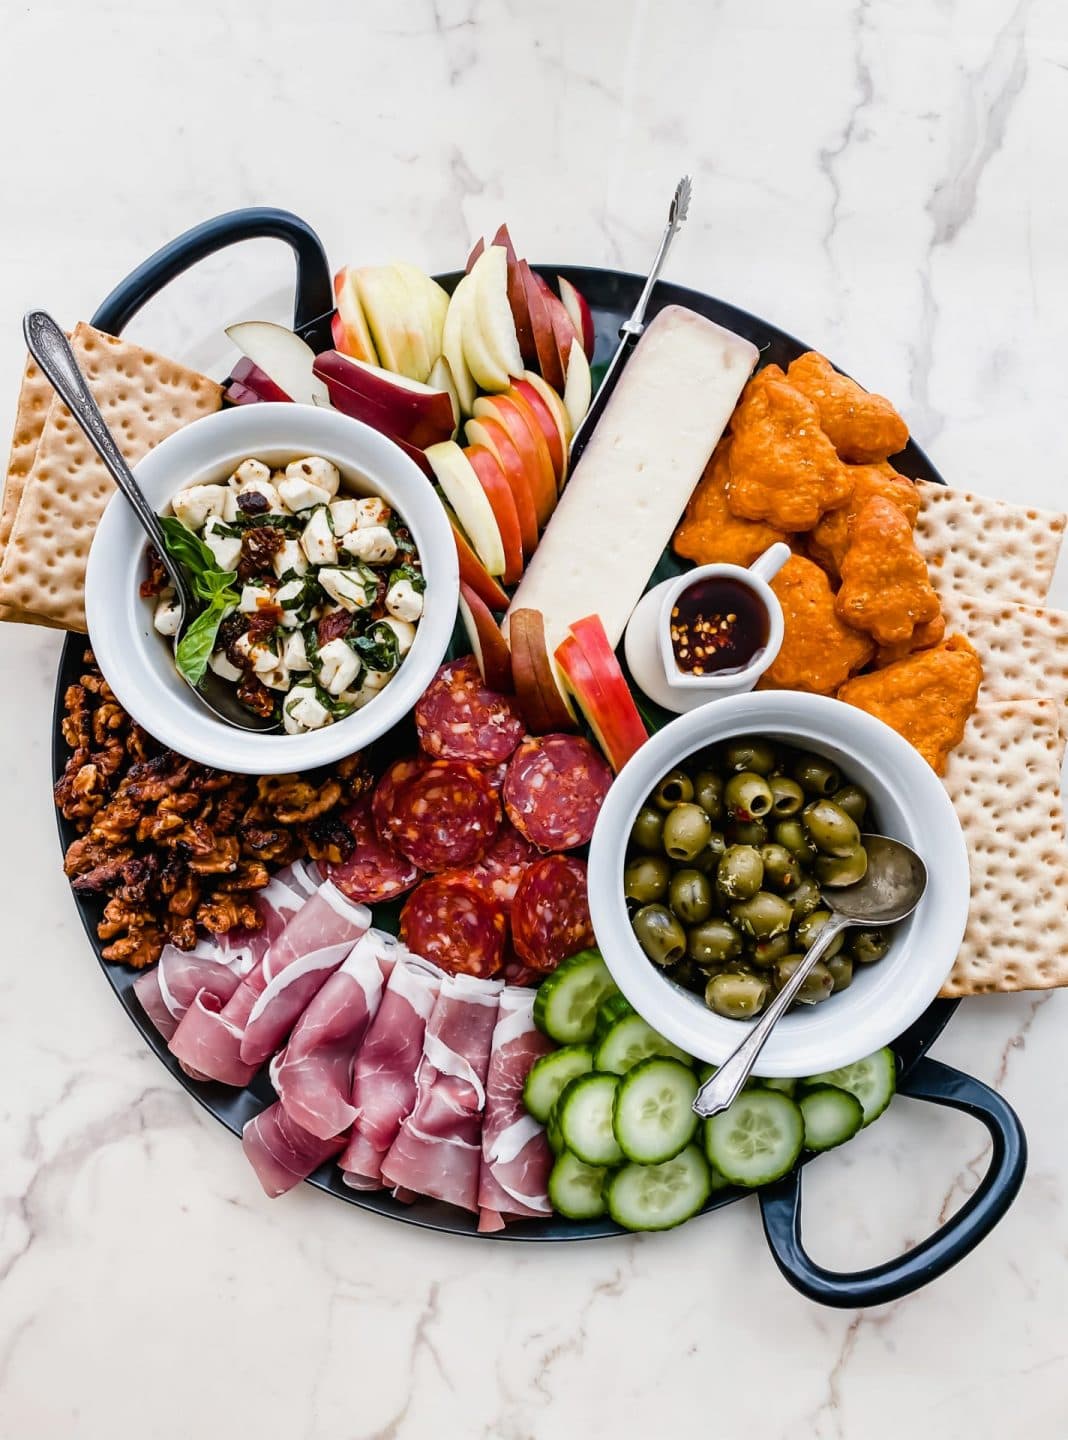 A black iron tray filled with cheese, vegetables and charcuterie.